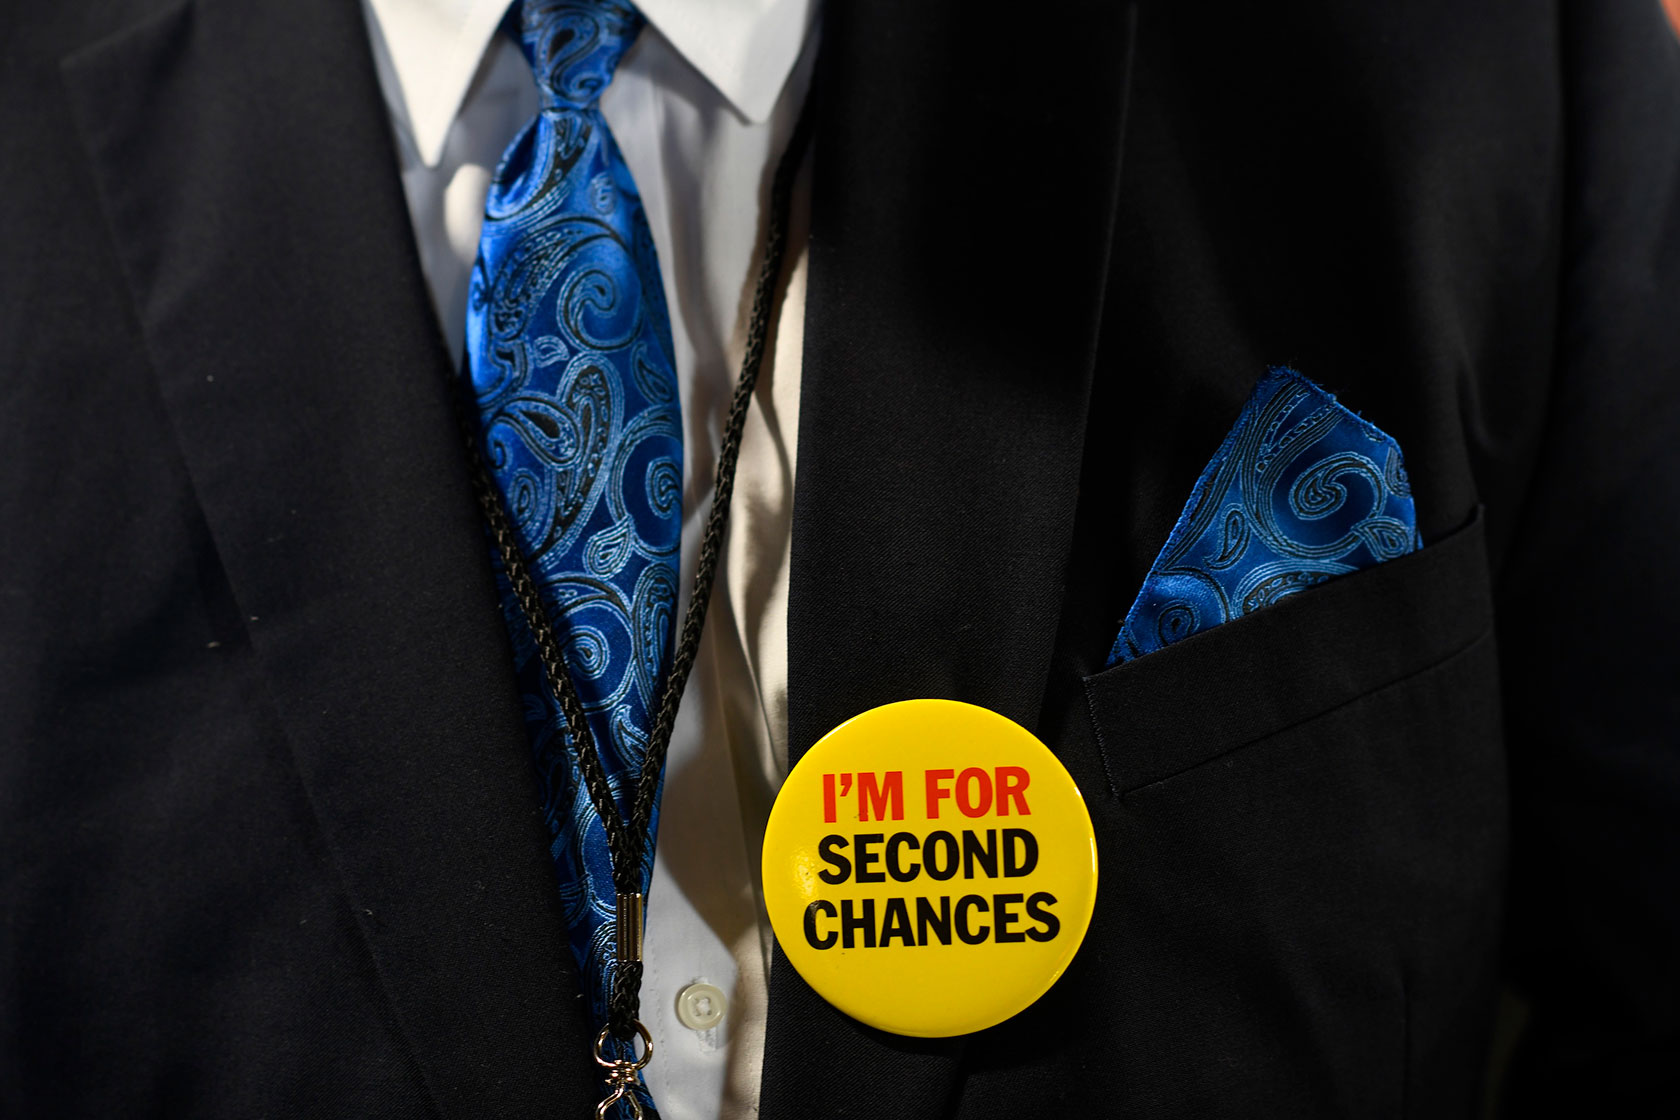 An attendee wears a pin that reads “I'm for second chances.”